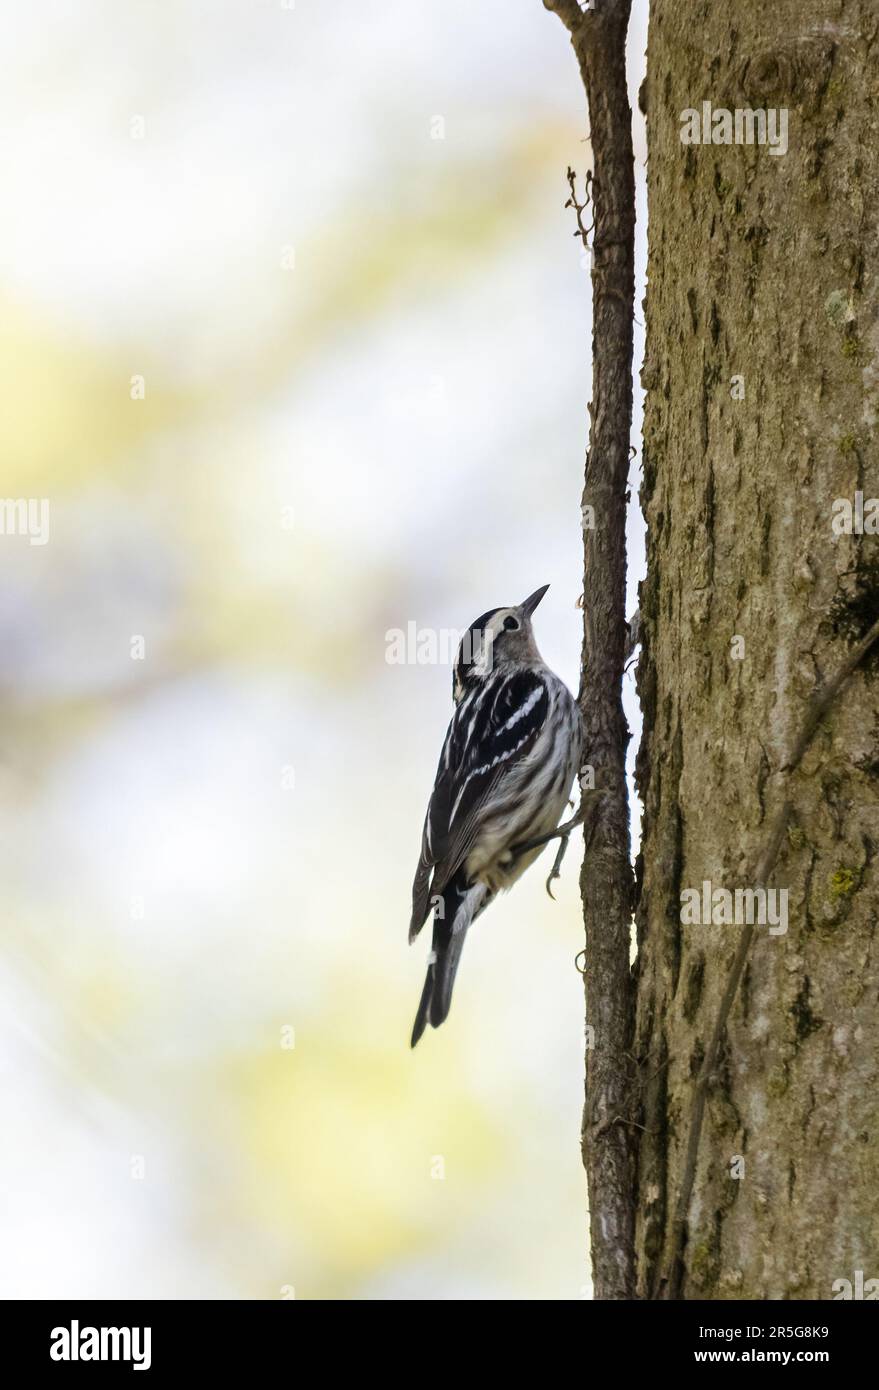 A Black and White Warbler on a tree in a sunlit forest Stock Photo